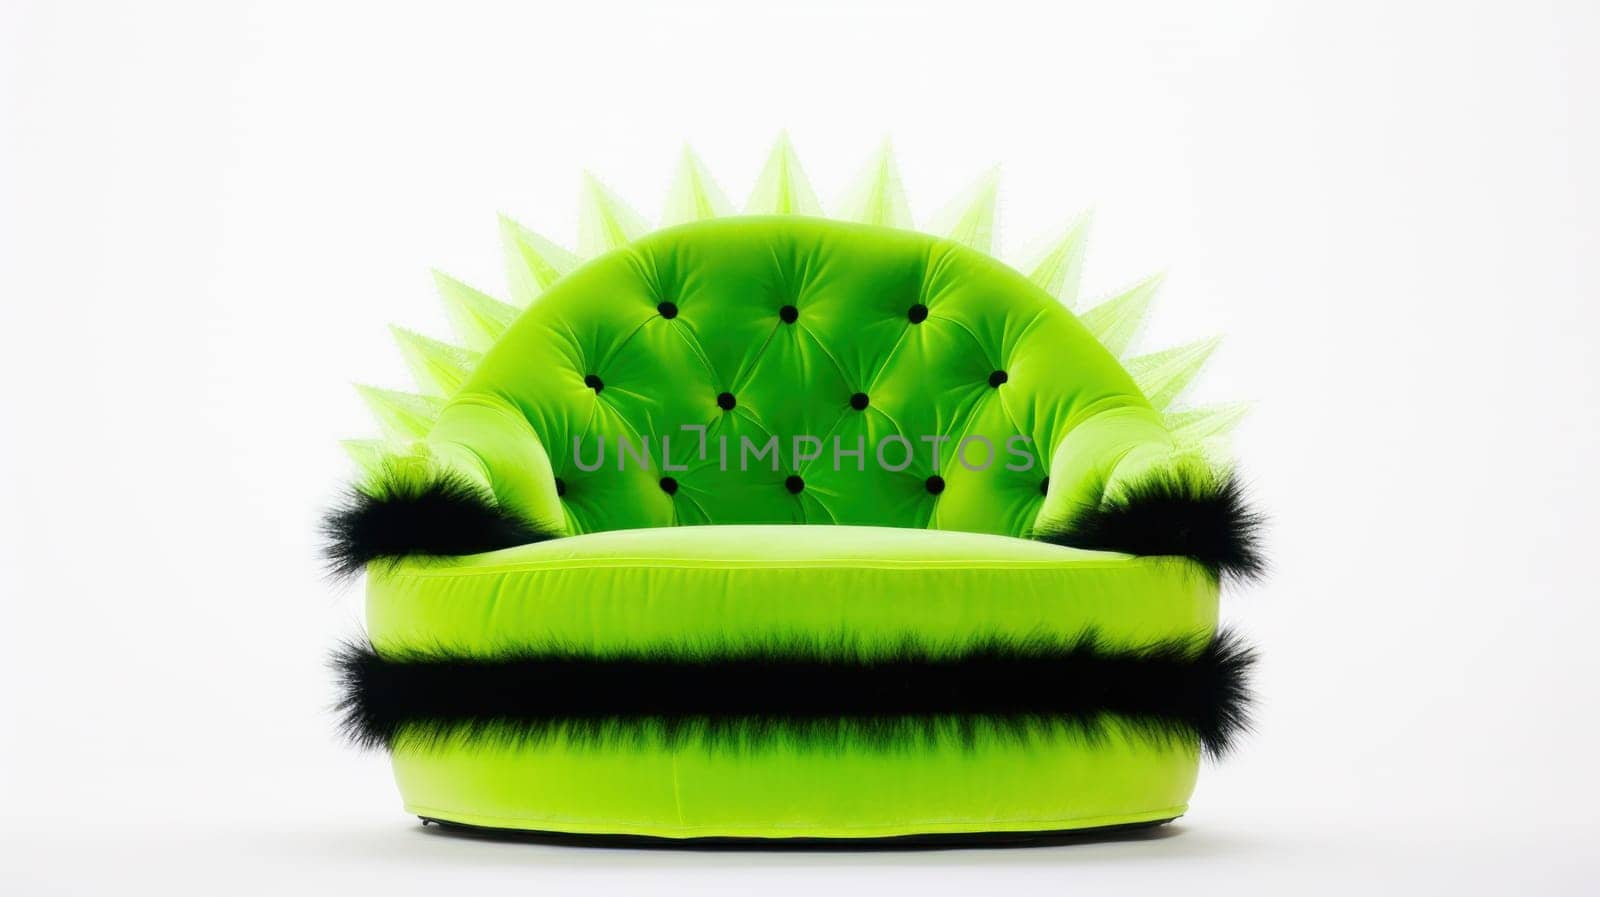 A green chair with black and white fur on it